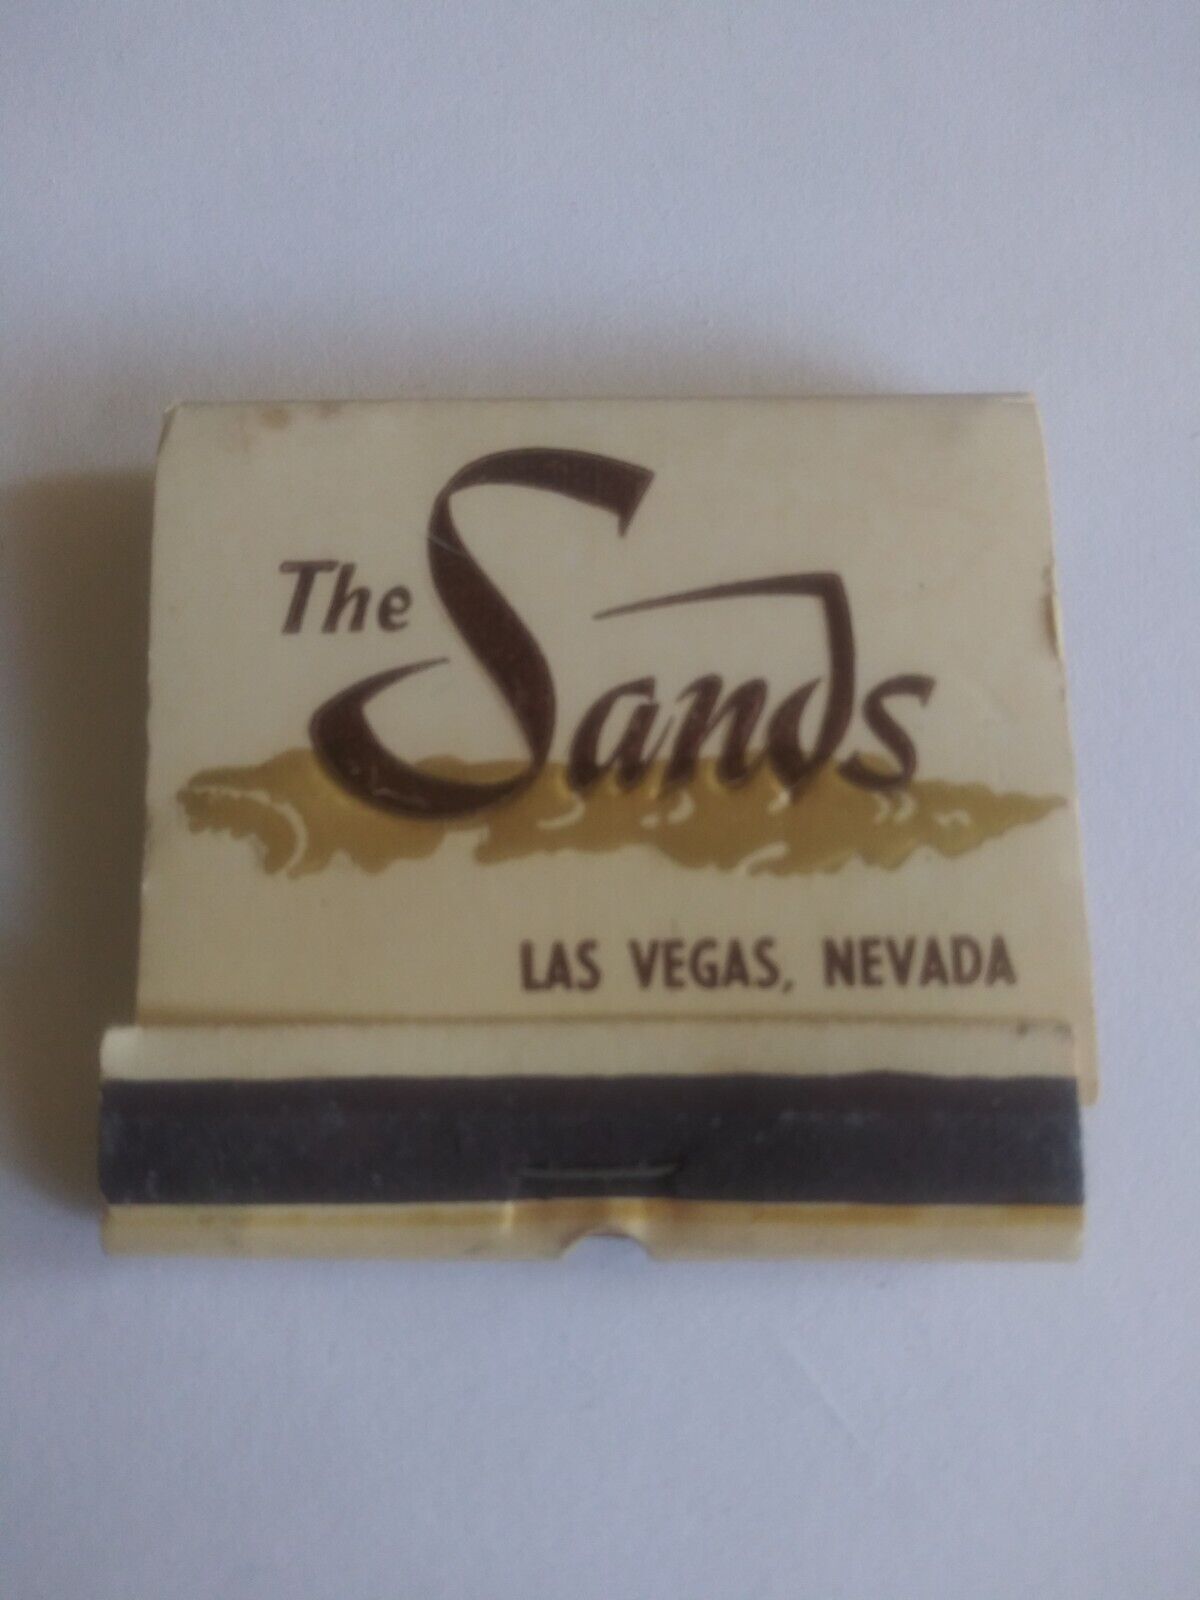 Vintage Feature Matches From The Sands Las Vegas Nevada. Lion Match Company.